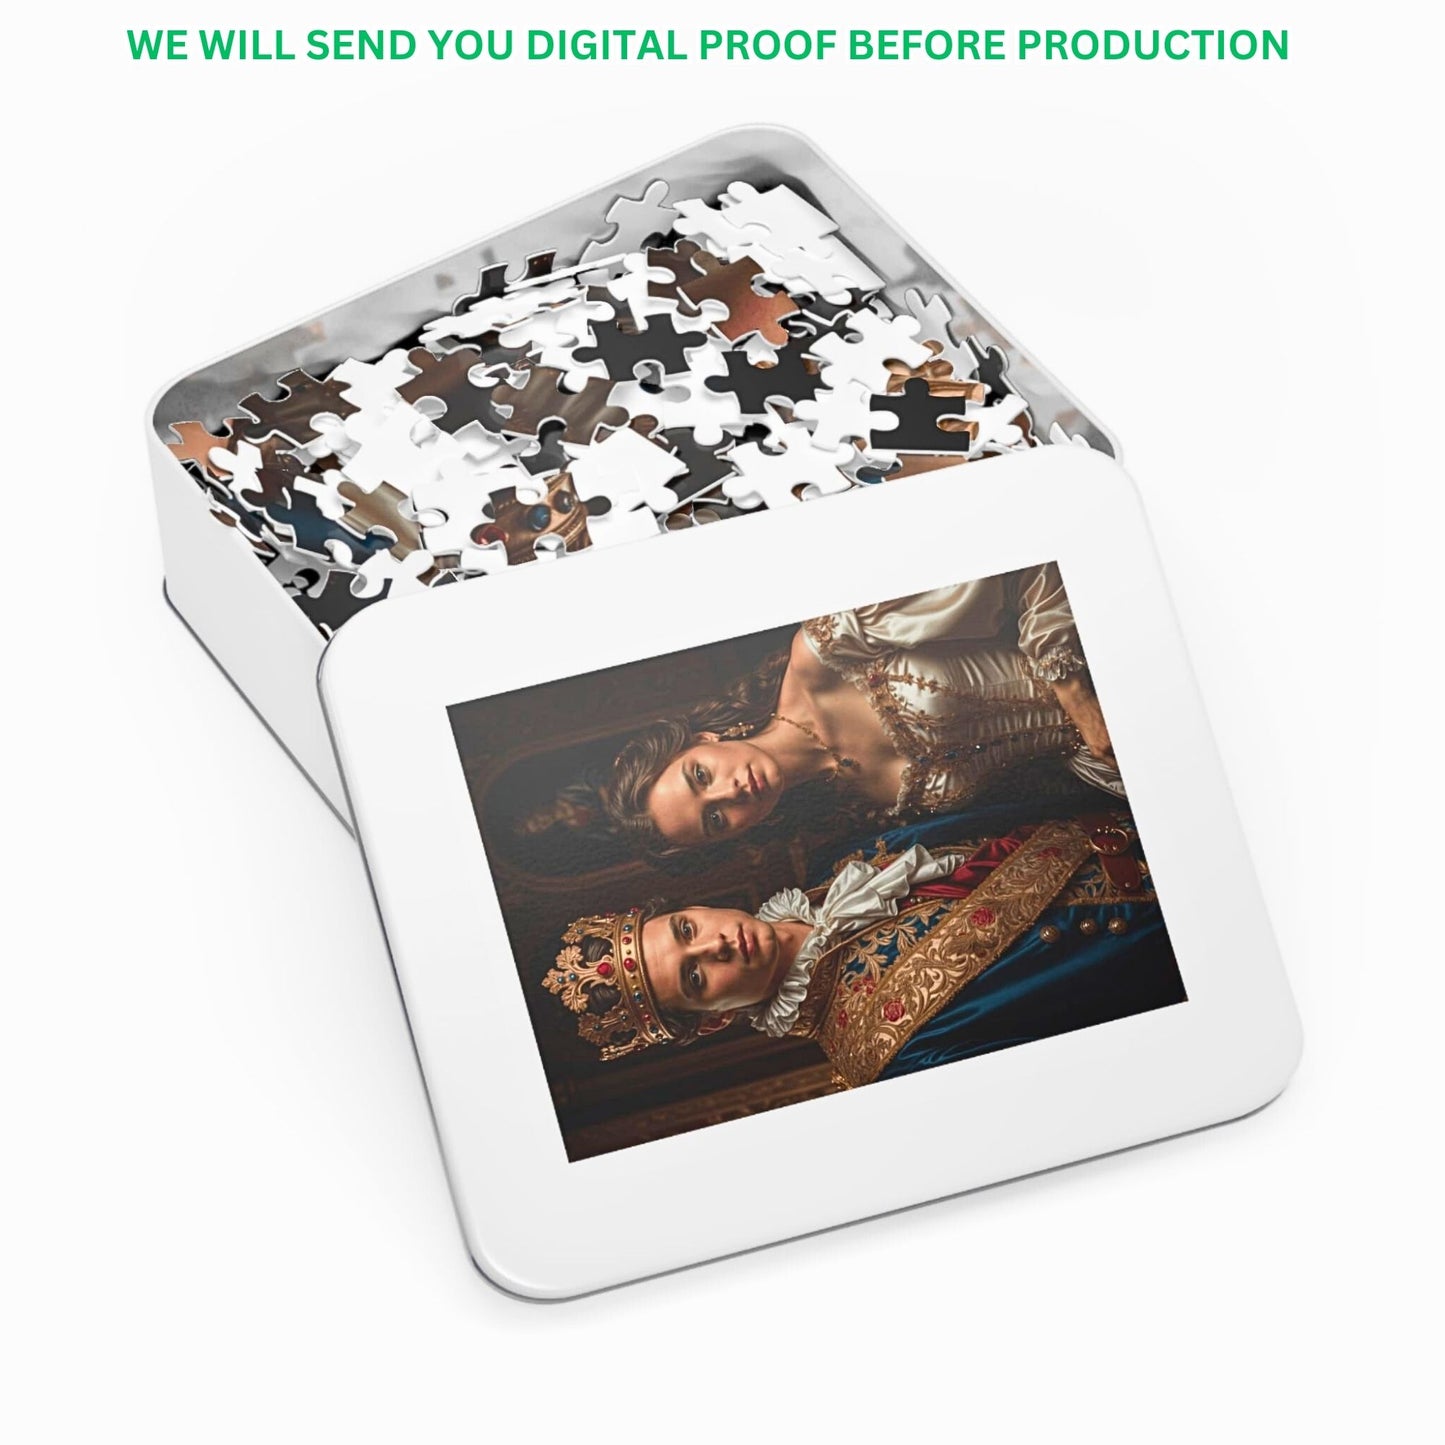 Unfold the elegance of custom royal couple puzzles, tailored from your cherished photographs. Ideal for birthdays, anniversaries, or any special occasion. Available in 252, 500, or 1000-piece sets, each puzzle is impeccably presented in a sleek metal box, promising a distinctive and heartfelt gift.